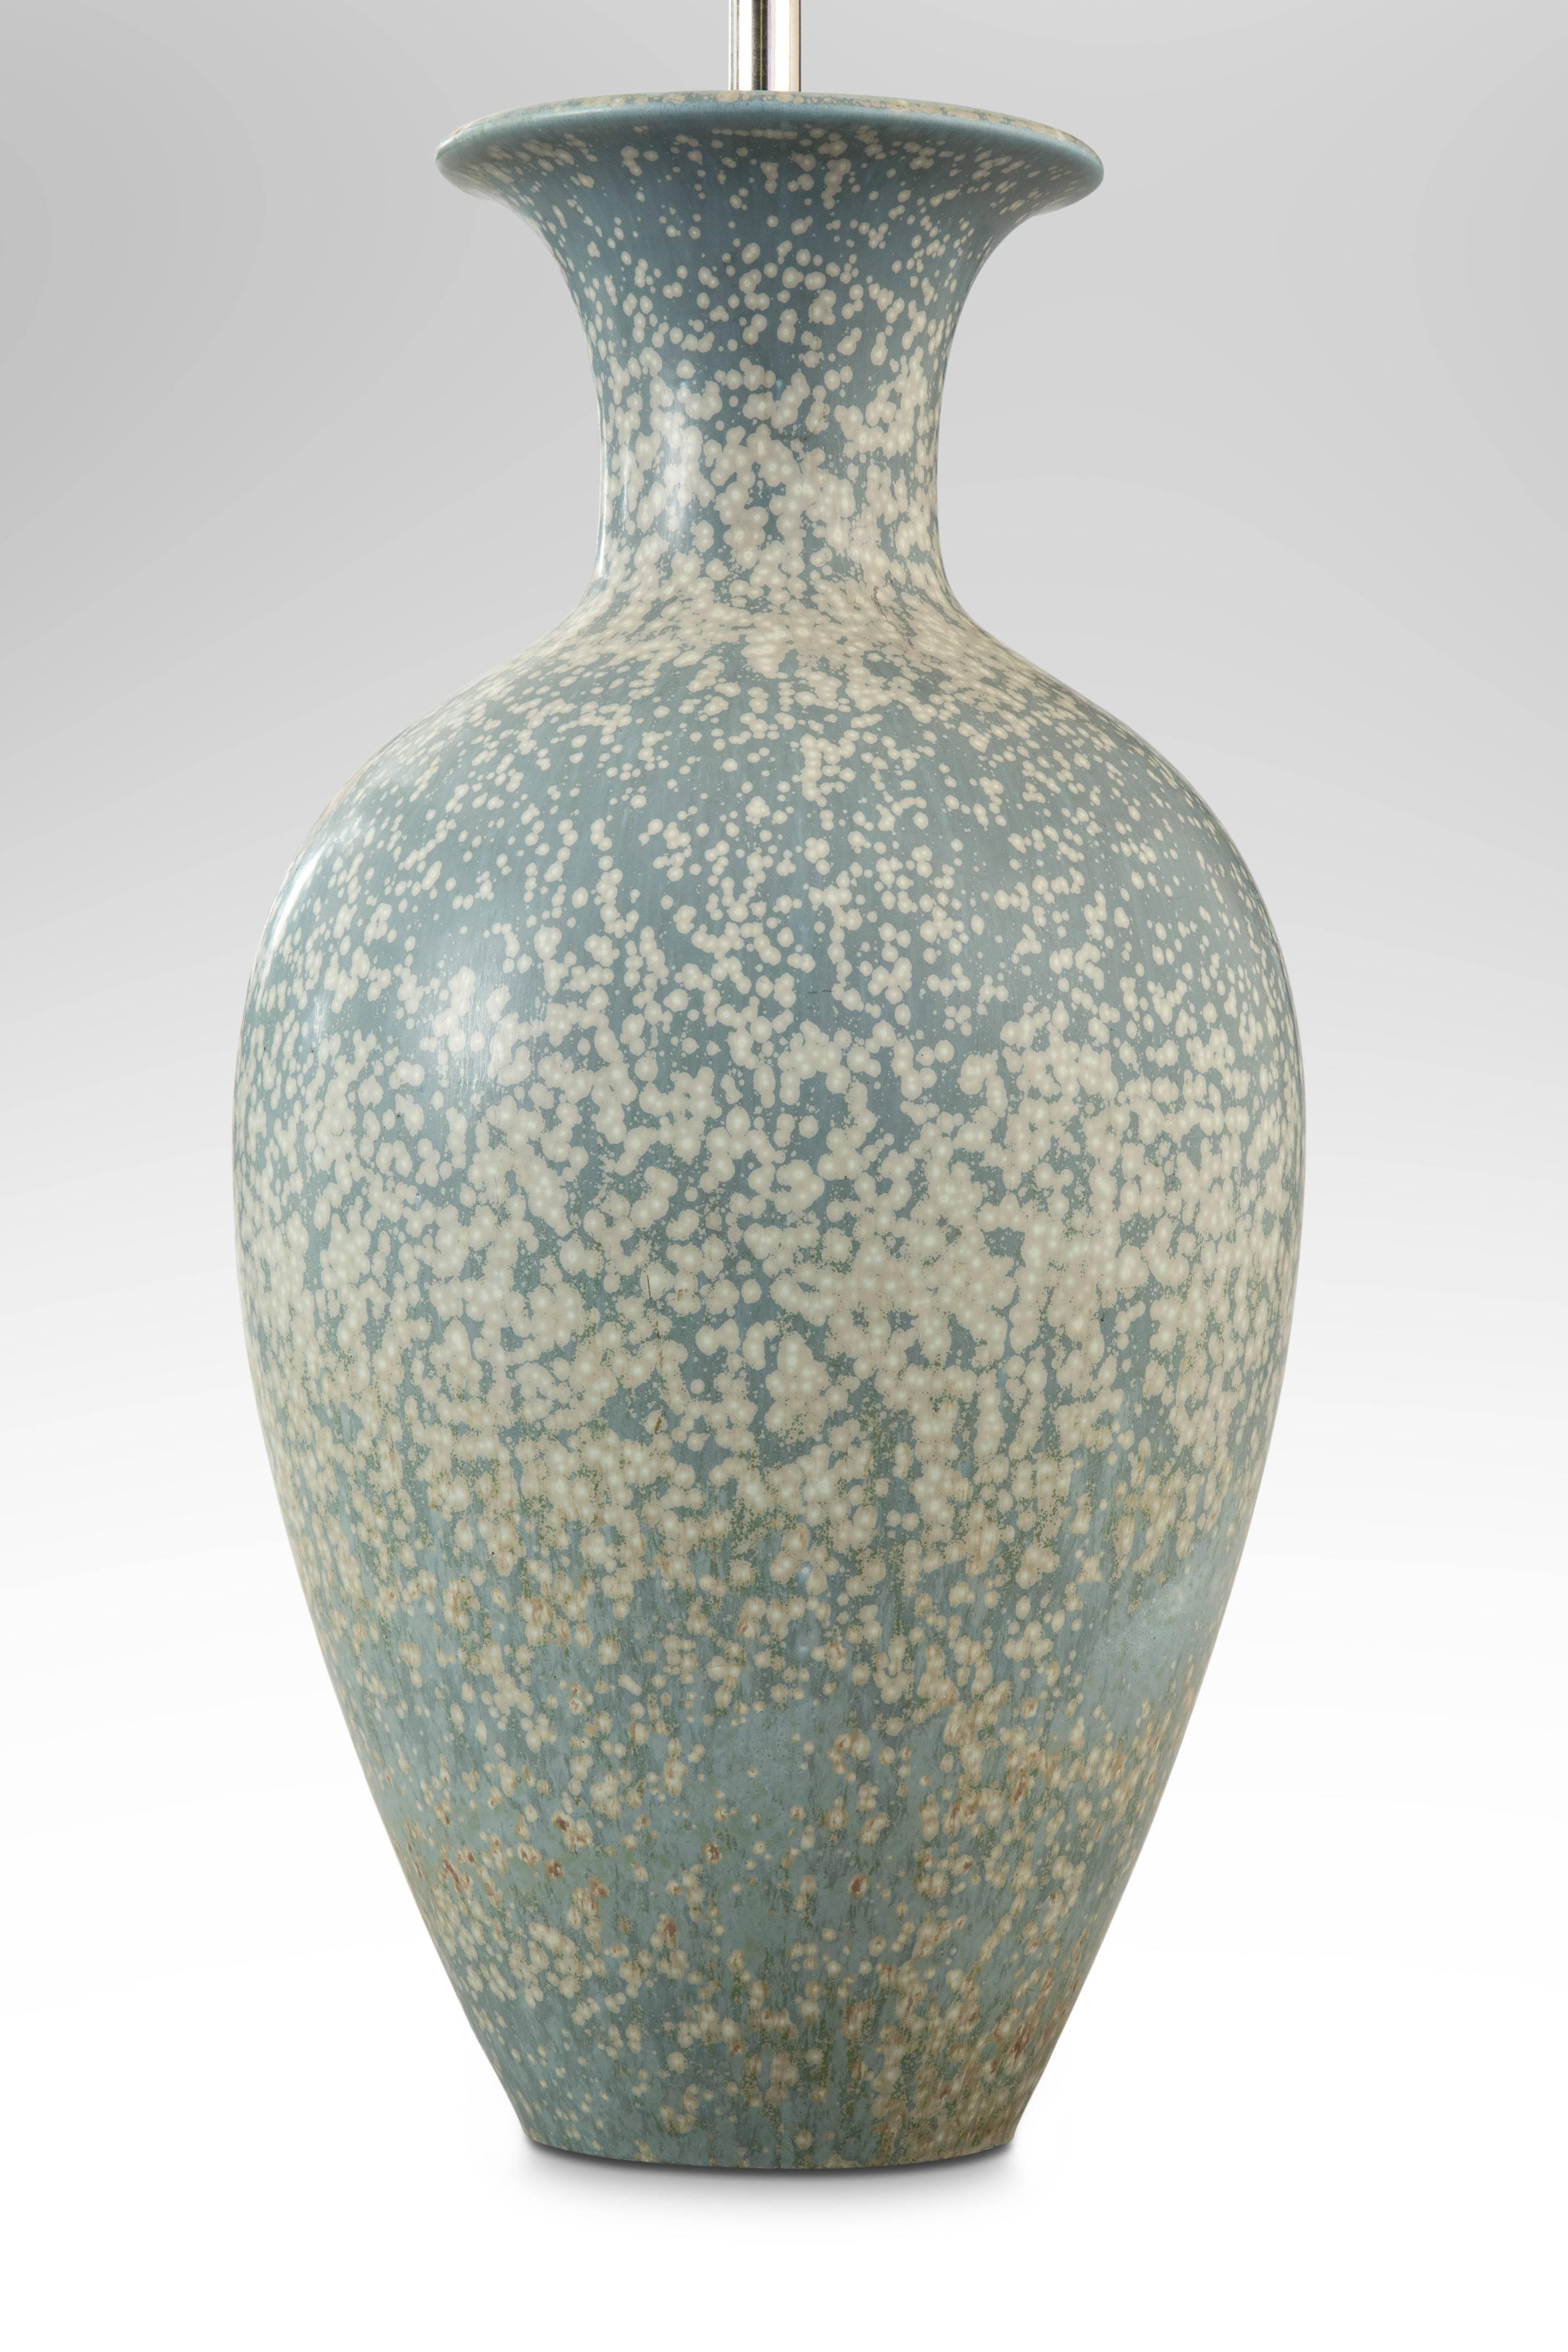 A fine example of Nylund's subtle use of variegated white and robins-egg blue glaze. The flared neck above an elegant ovoid body.

Very good condition and ready to add to your collection. Museum wired, not drilled, lamp can easily be converted back